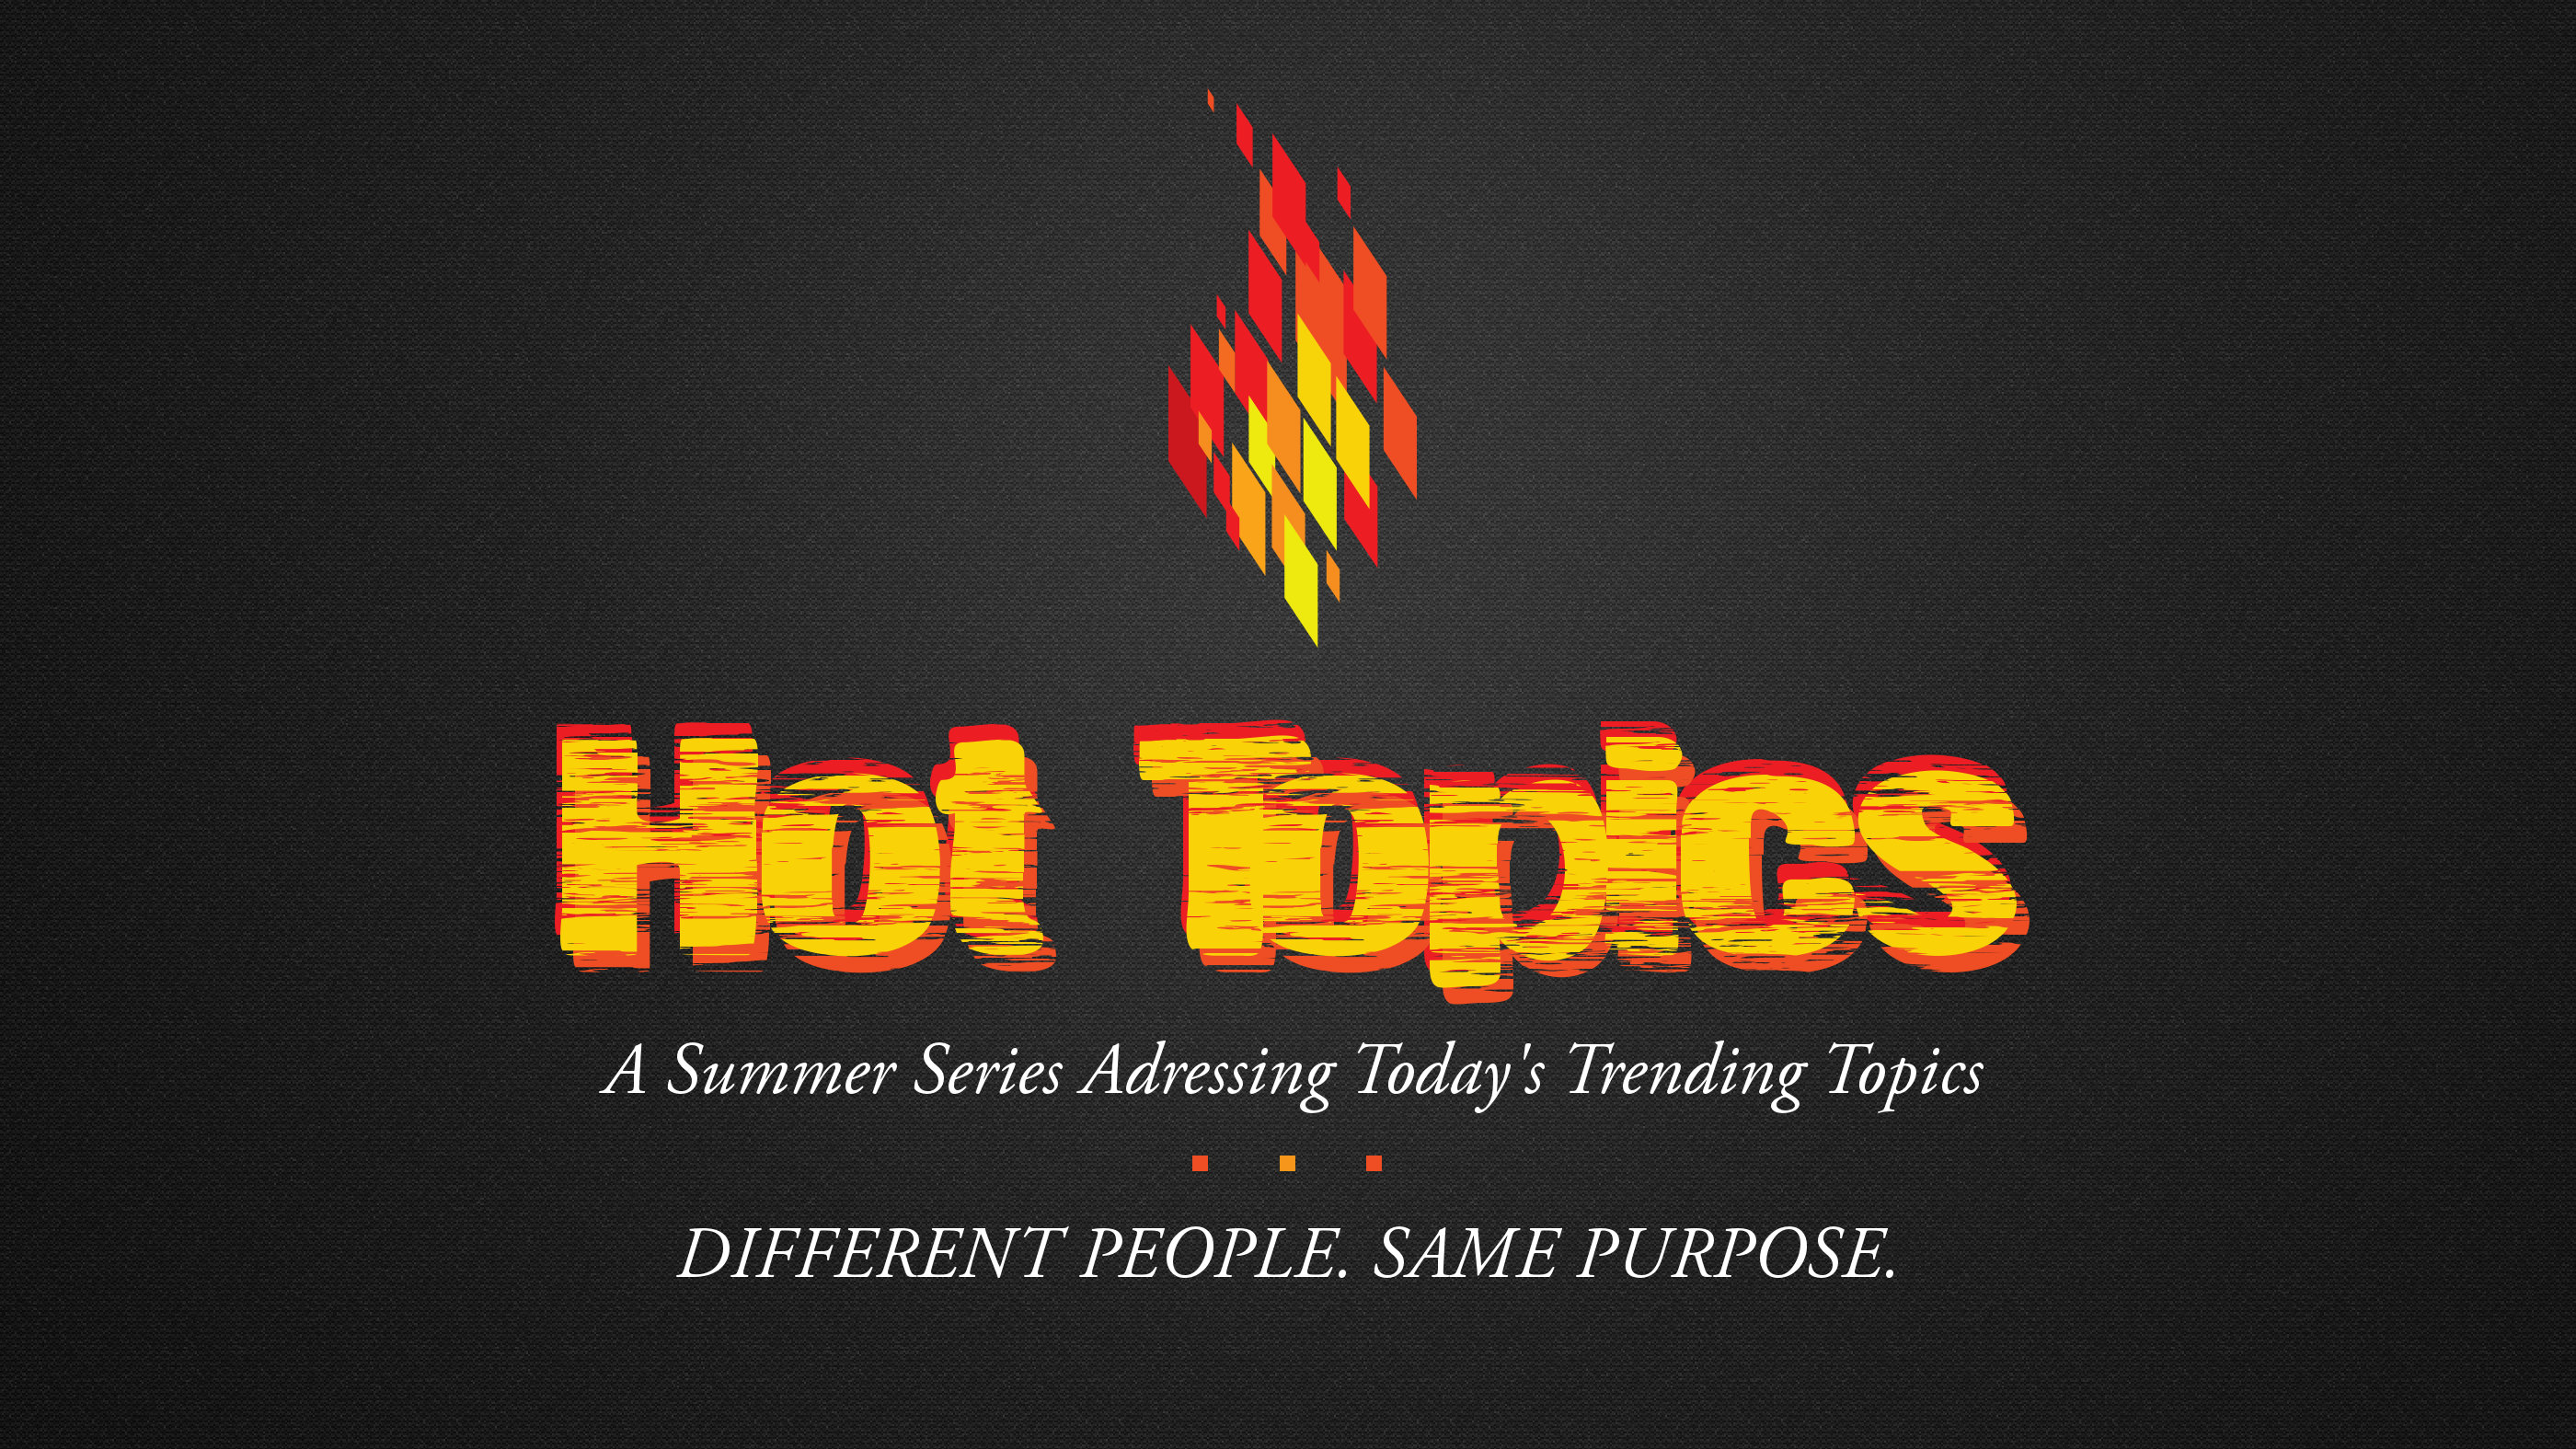 Hot Topics - Different People. Same Purpose.